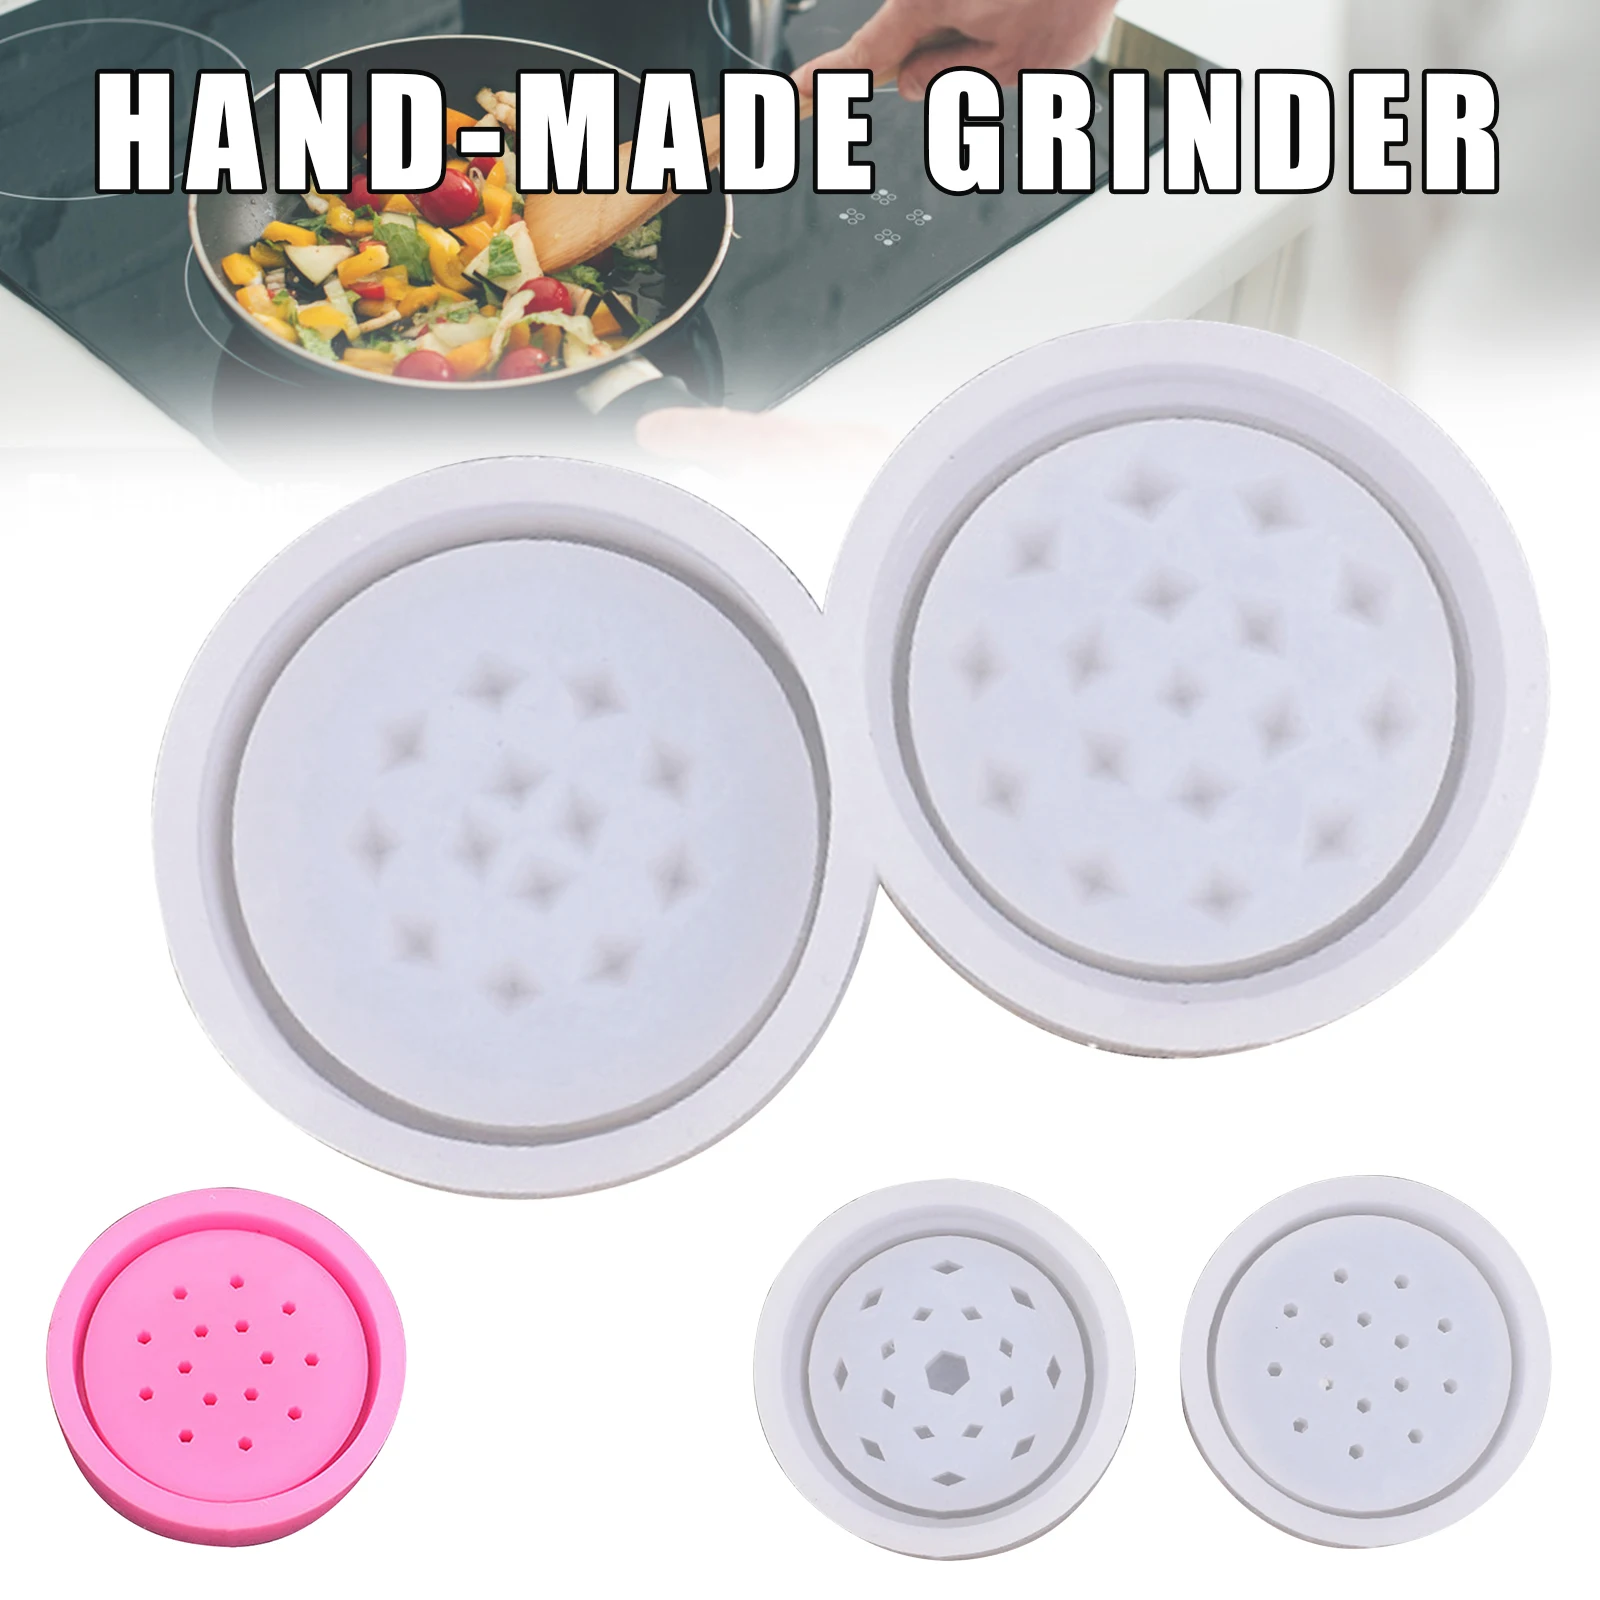 

Grinder Mold 2.36"x0.7"/3.54"x0.7" Handmade Multi-Purpose Silicone Grinding Mould Tools J55